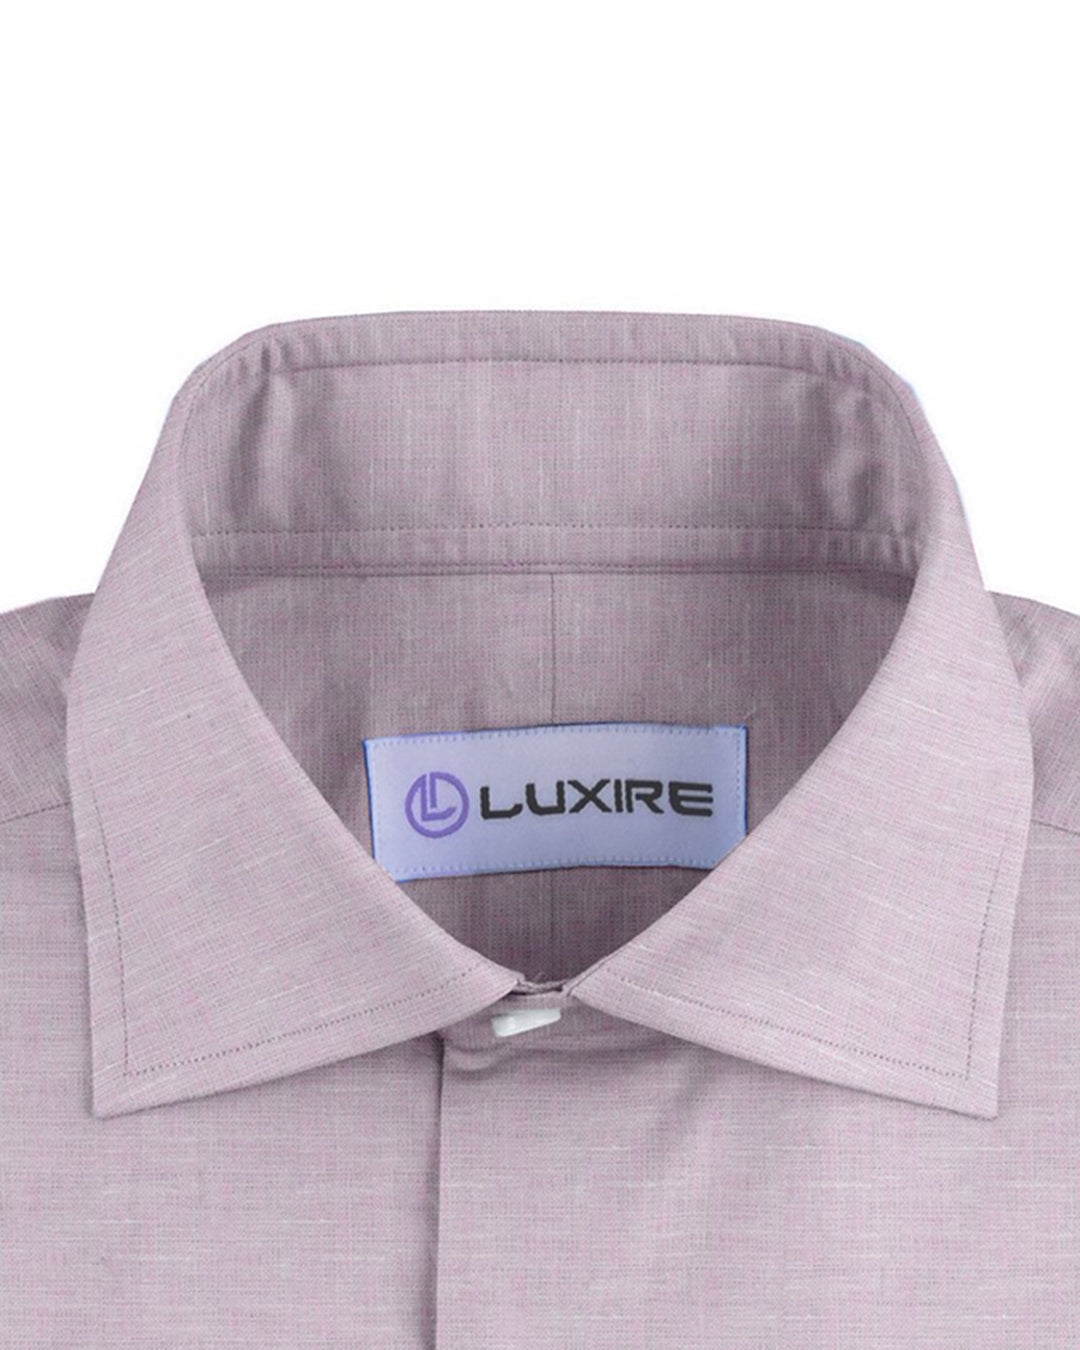 Collar of the custom linen shirt for men in pale pink by Luxire Clothing